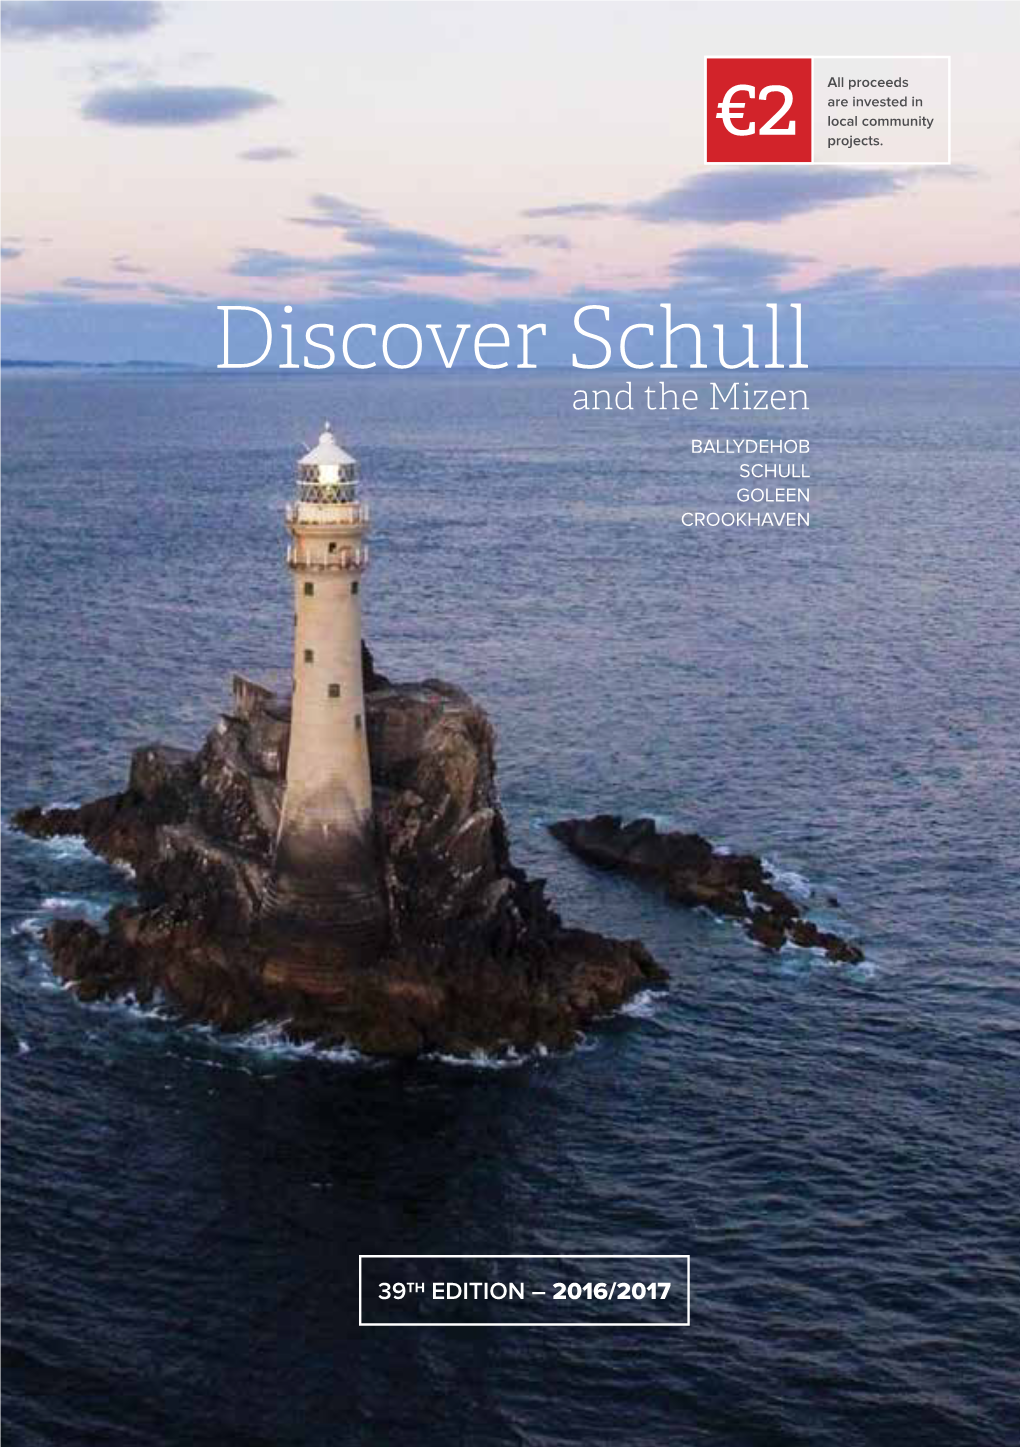 Discover Schull and the Mizen